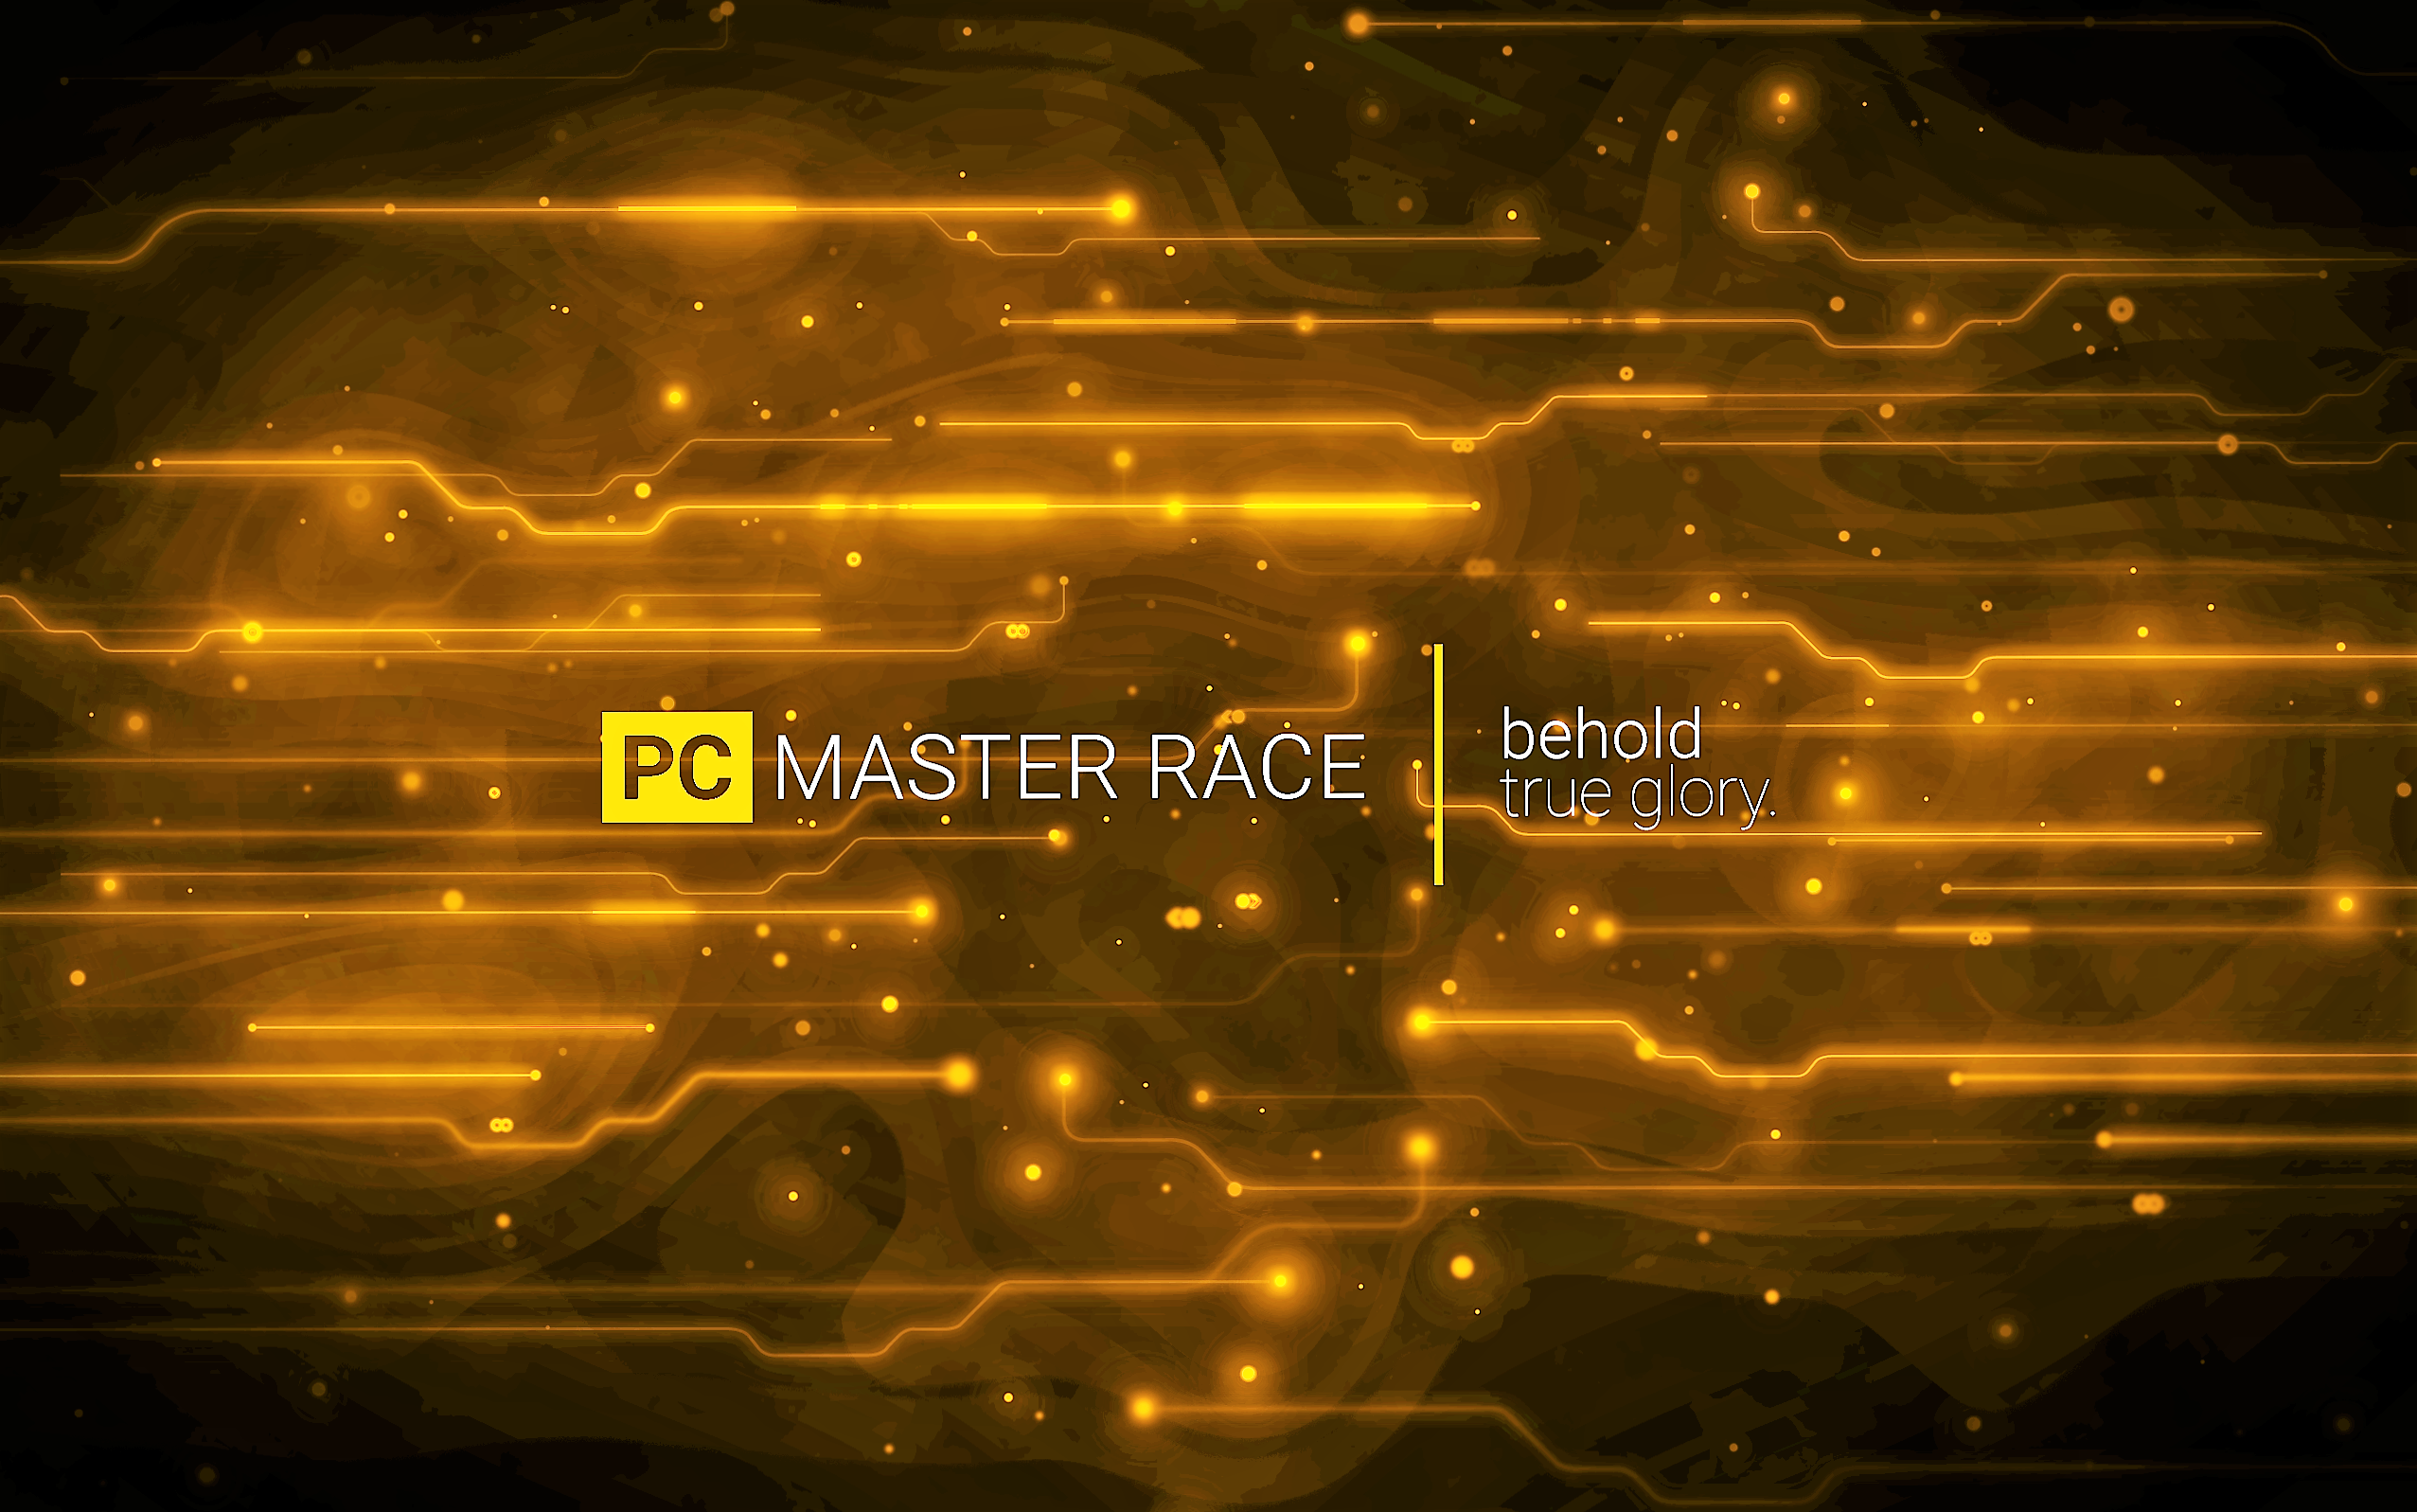 Did A Quick Edit Of The New Wallpaper Going Around - Pc Master Race Behold True Glory - HD Wallpaper 